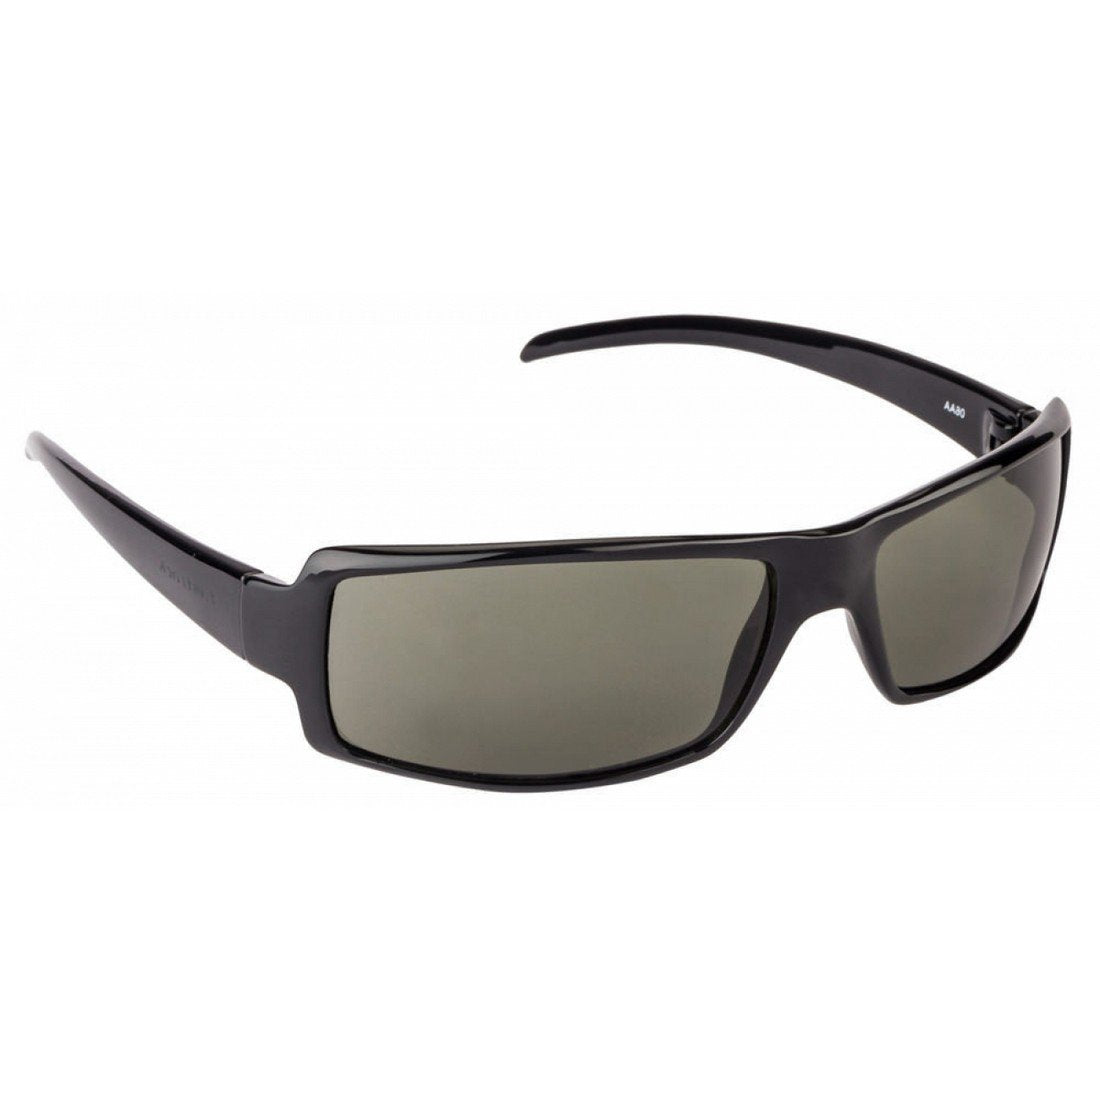 Fastrack P040BK1Wrapround Style Full Rimmed Black color Sunglasses with Black Colored LENS, For Men & Women